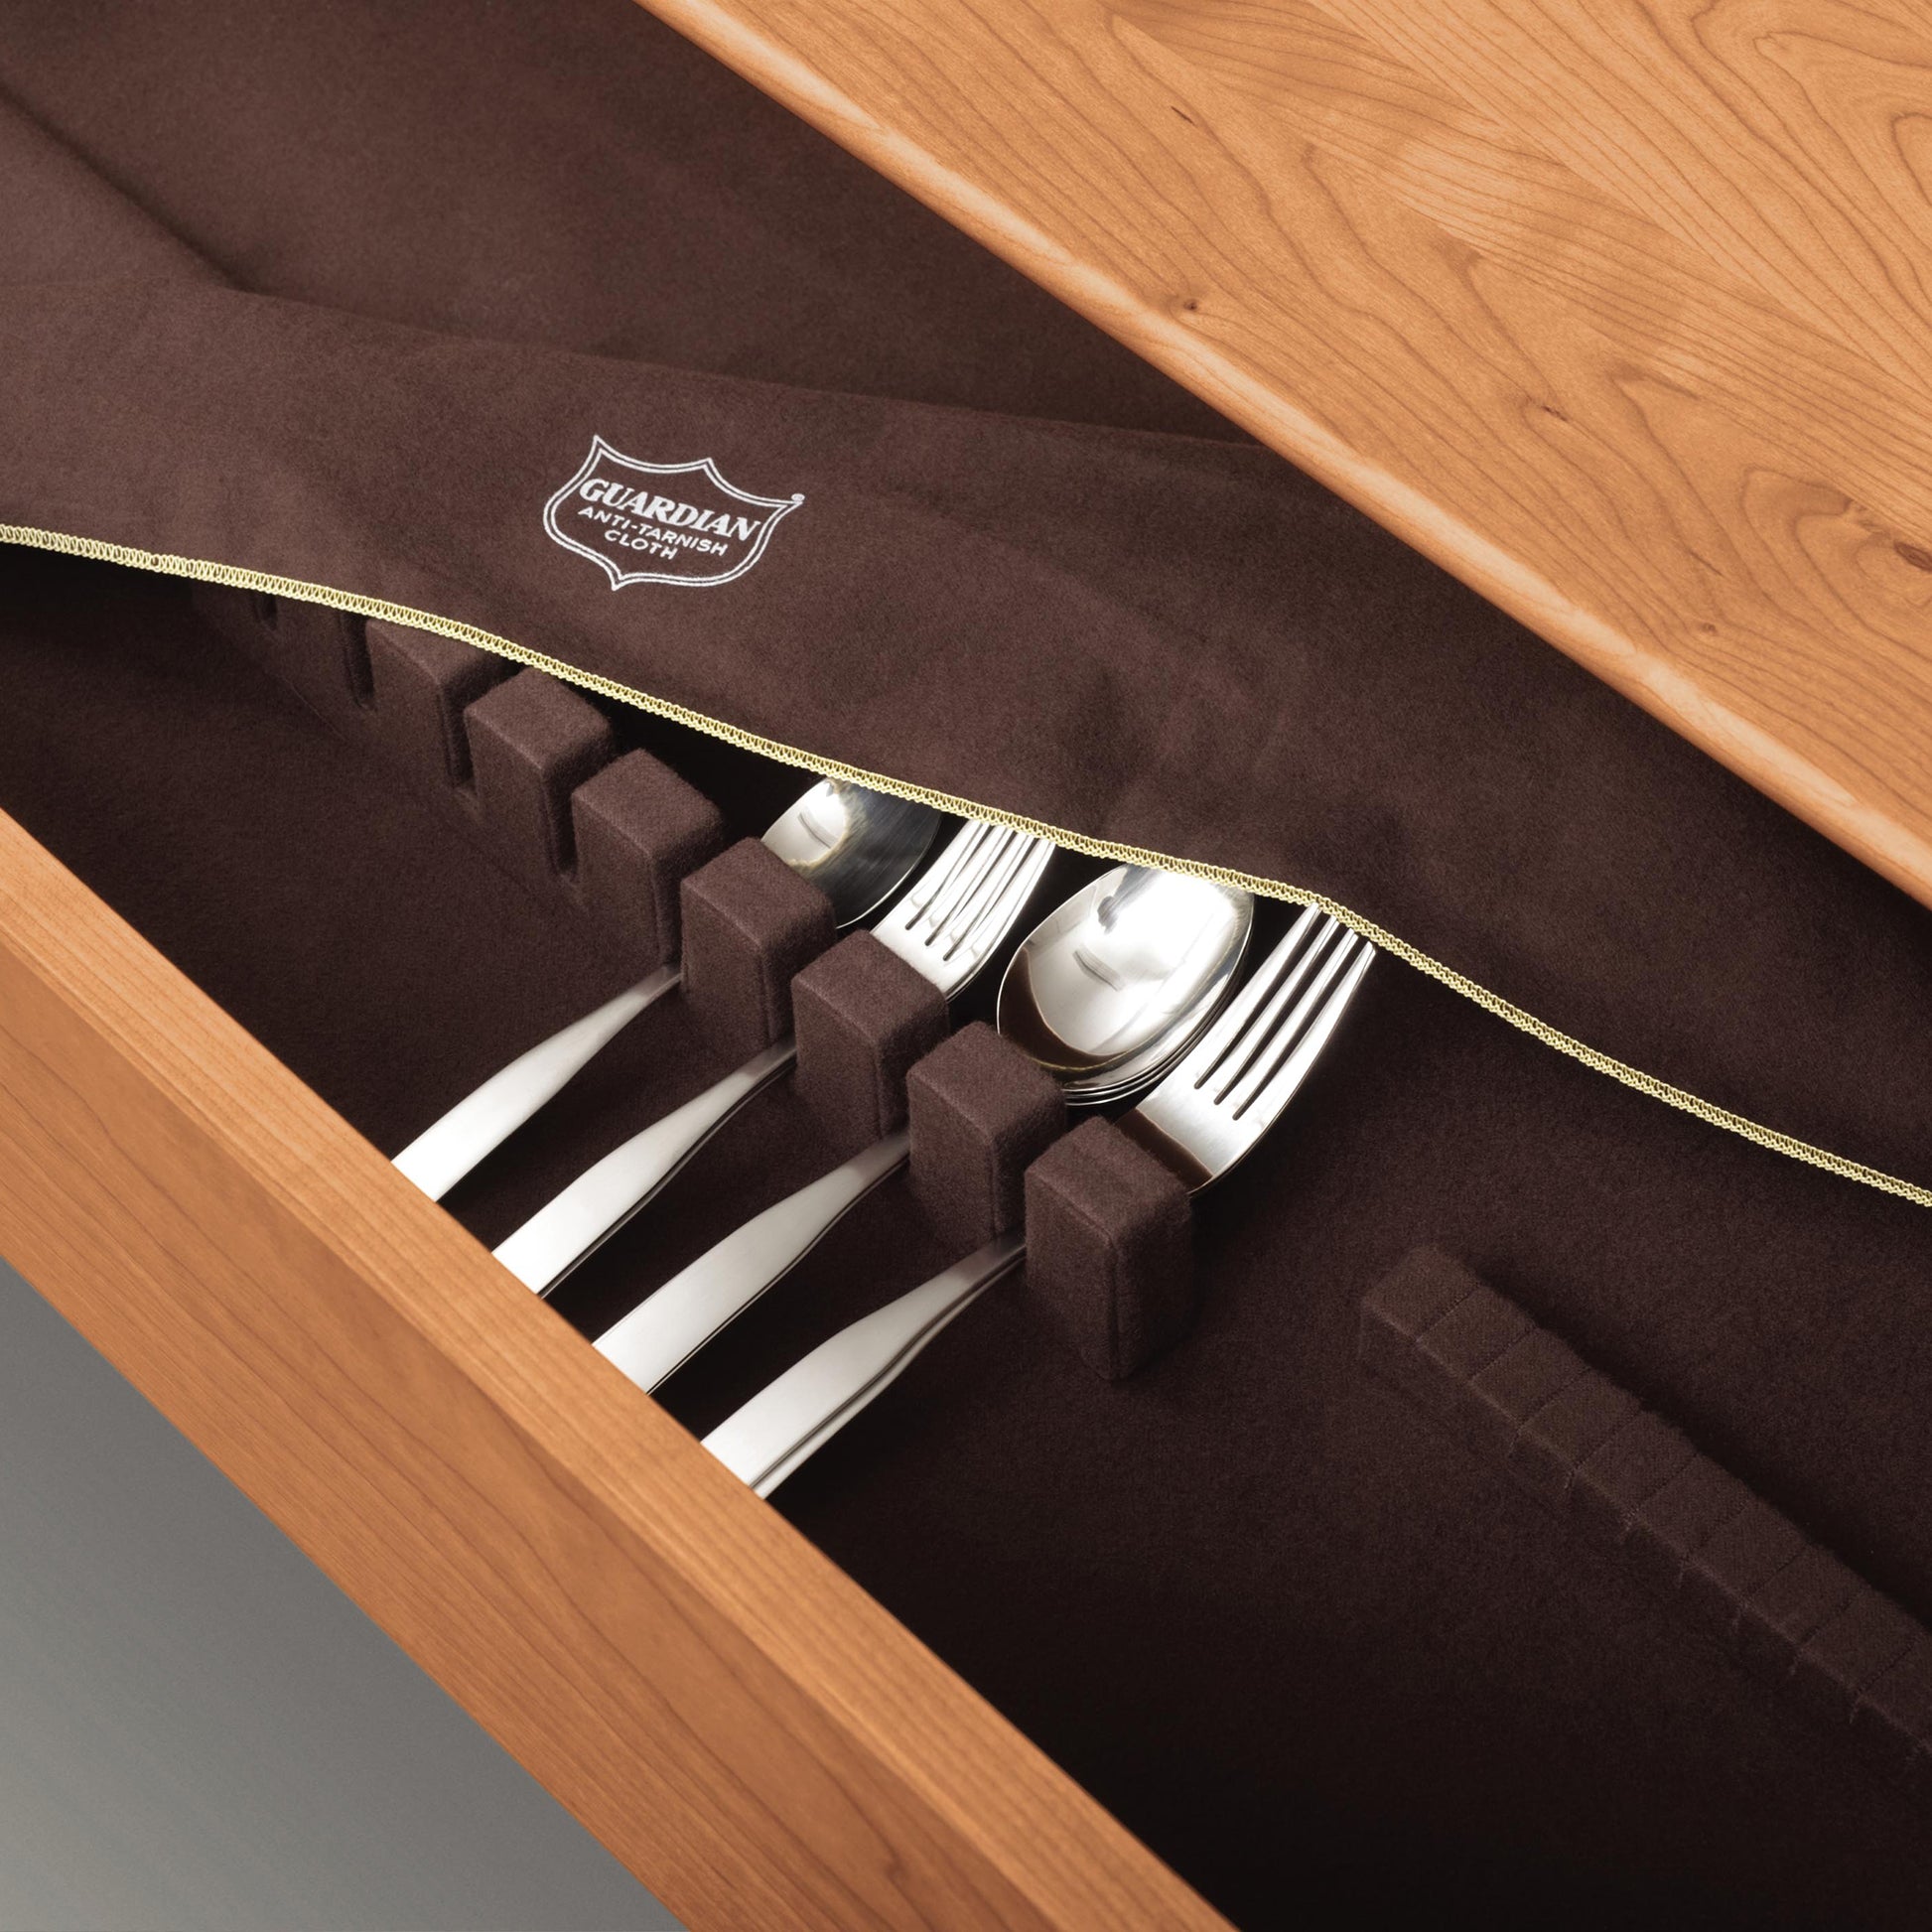 Wooden drawer from the Copeland Furniture Sarah Shaker Collection with a set of cutlery organized neatly in a built-in divider, lined with a dark brown fabric.